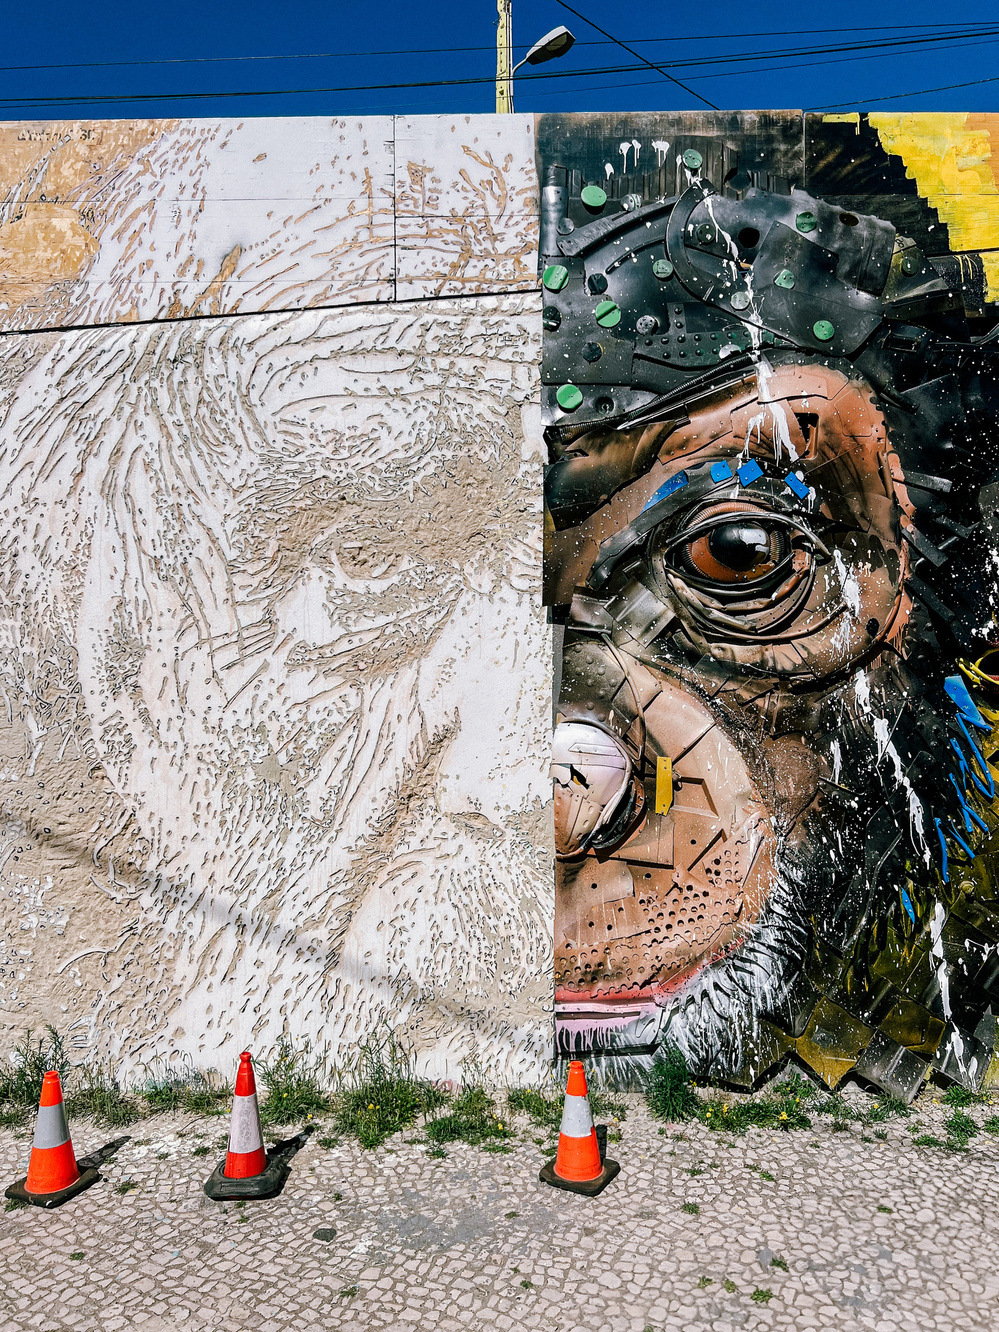 Street art mural featuring a highly detailed human-like face on the left side and a vibrant, textured depiction of a chimp on the right side. Three orange traffic cones are positioned in front of the mural on a cobblestone ground.